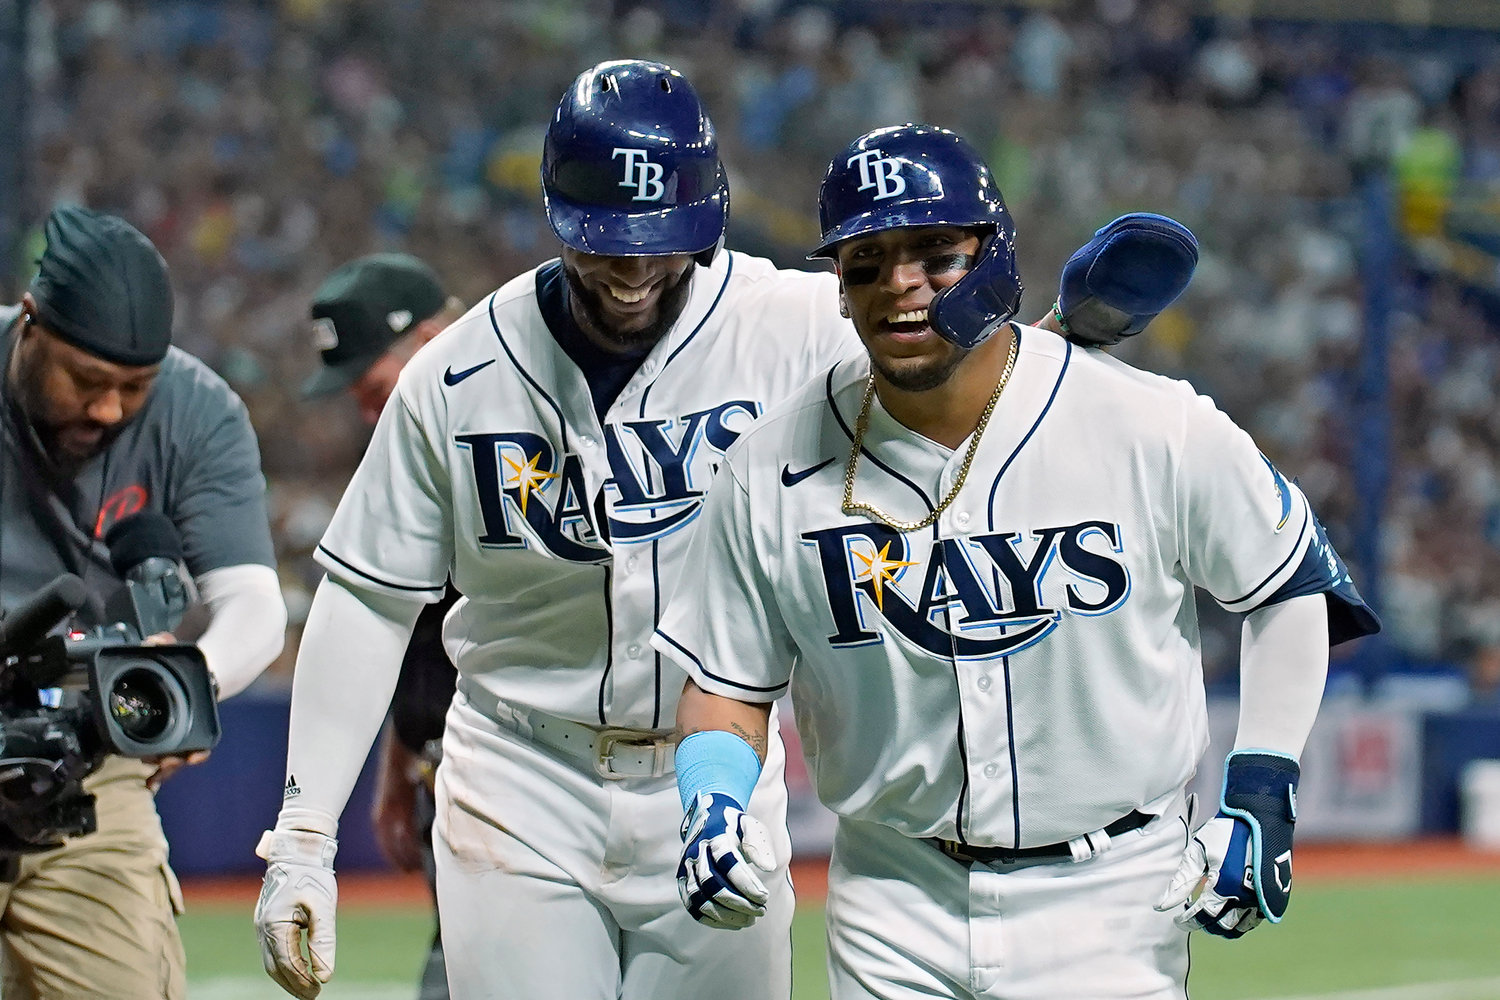 Tampa Bay Rays’ Isaac Paredes, right, celebrates with Yandy Diaz after Paredes hit a two-run home run off New York Yankees pitcher Clarke Schmidt during the fifth inning of a game Tuesday night in St. Petersburg, Fla. The Rays won 5-4.